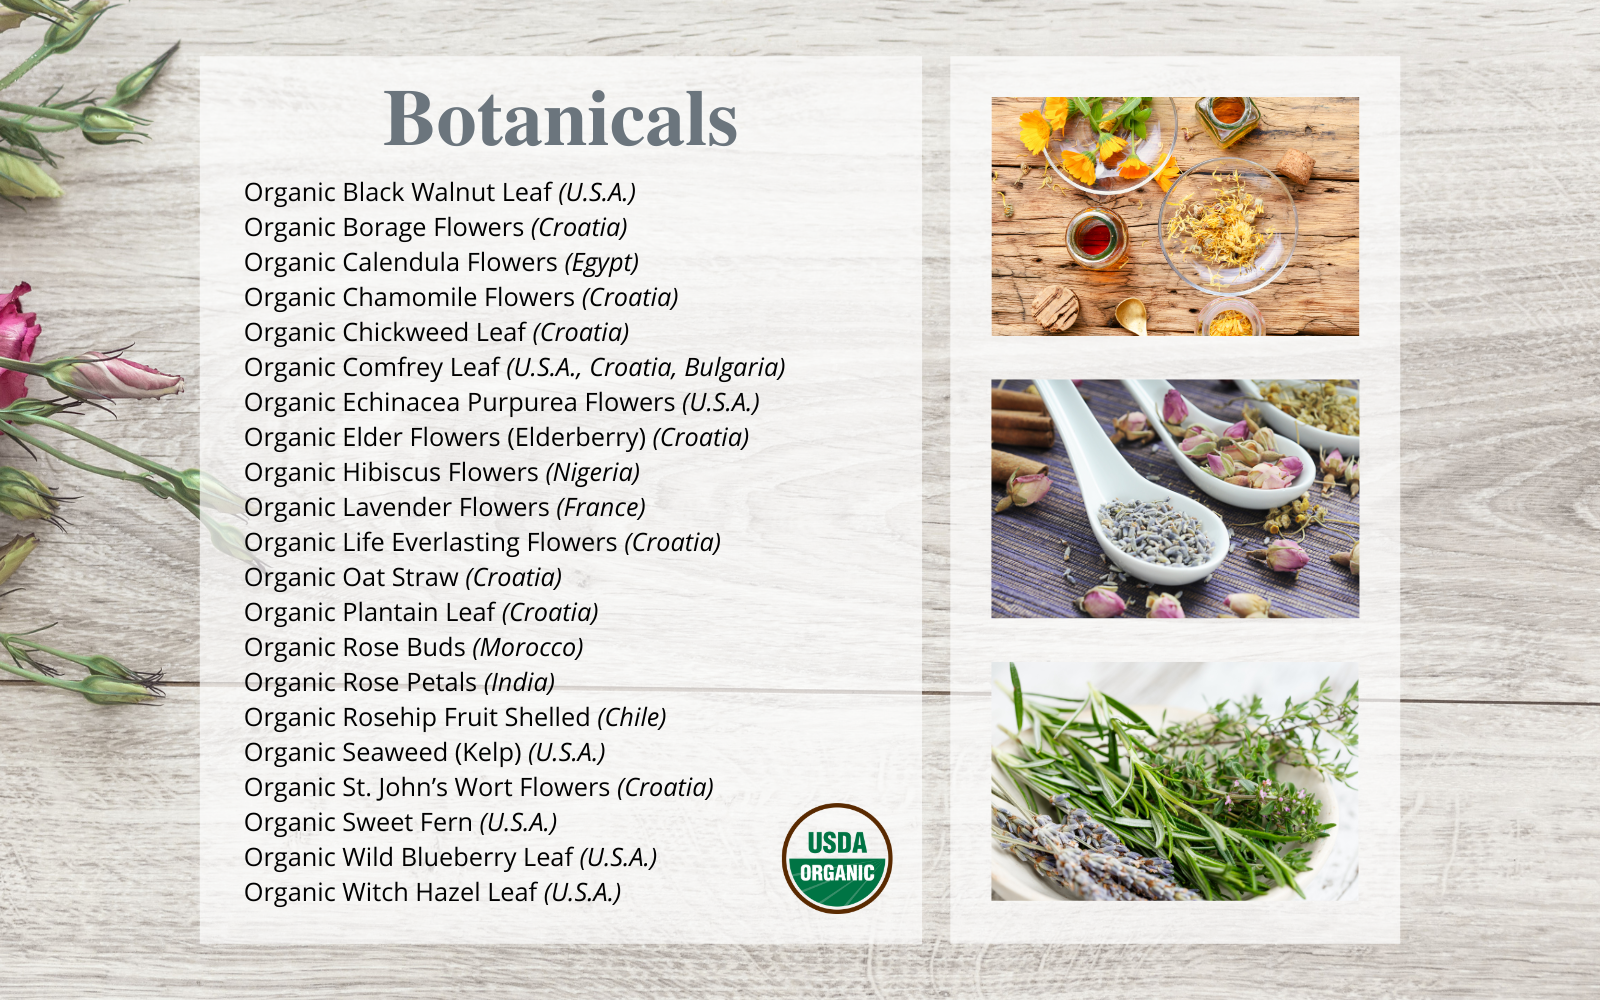 List of Organic Botanicals Ingredients on natural wood grain background with herbal images